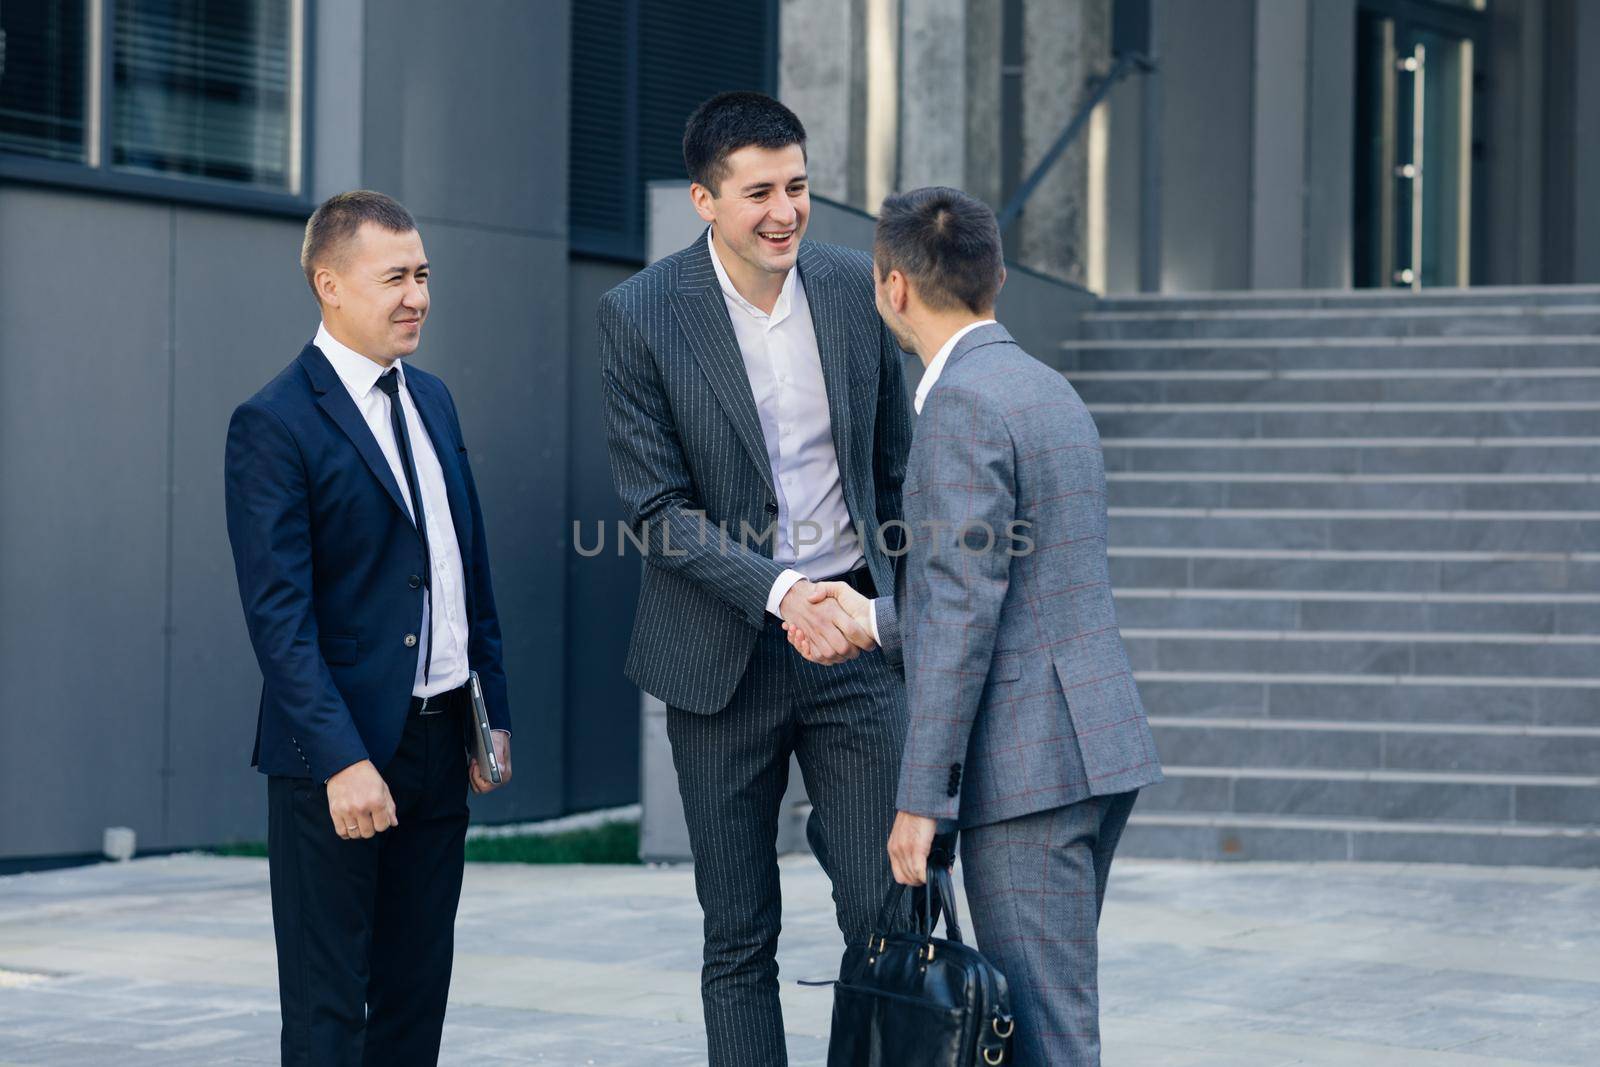 Group of Happy Men Corporate Workers Greeting Each Other Shaking Hands Starting Their Working Day in Contemporary Business District. by uflypro